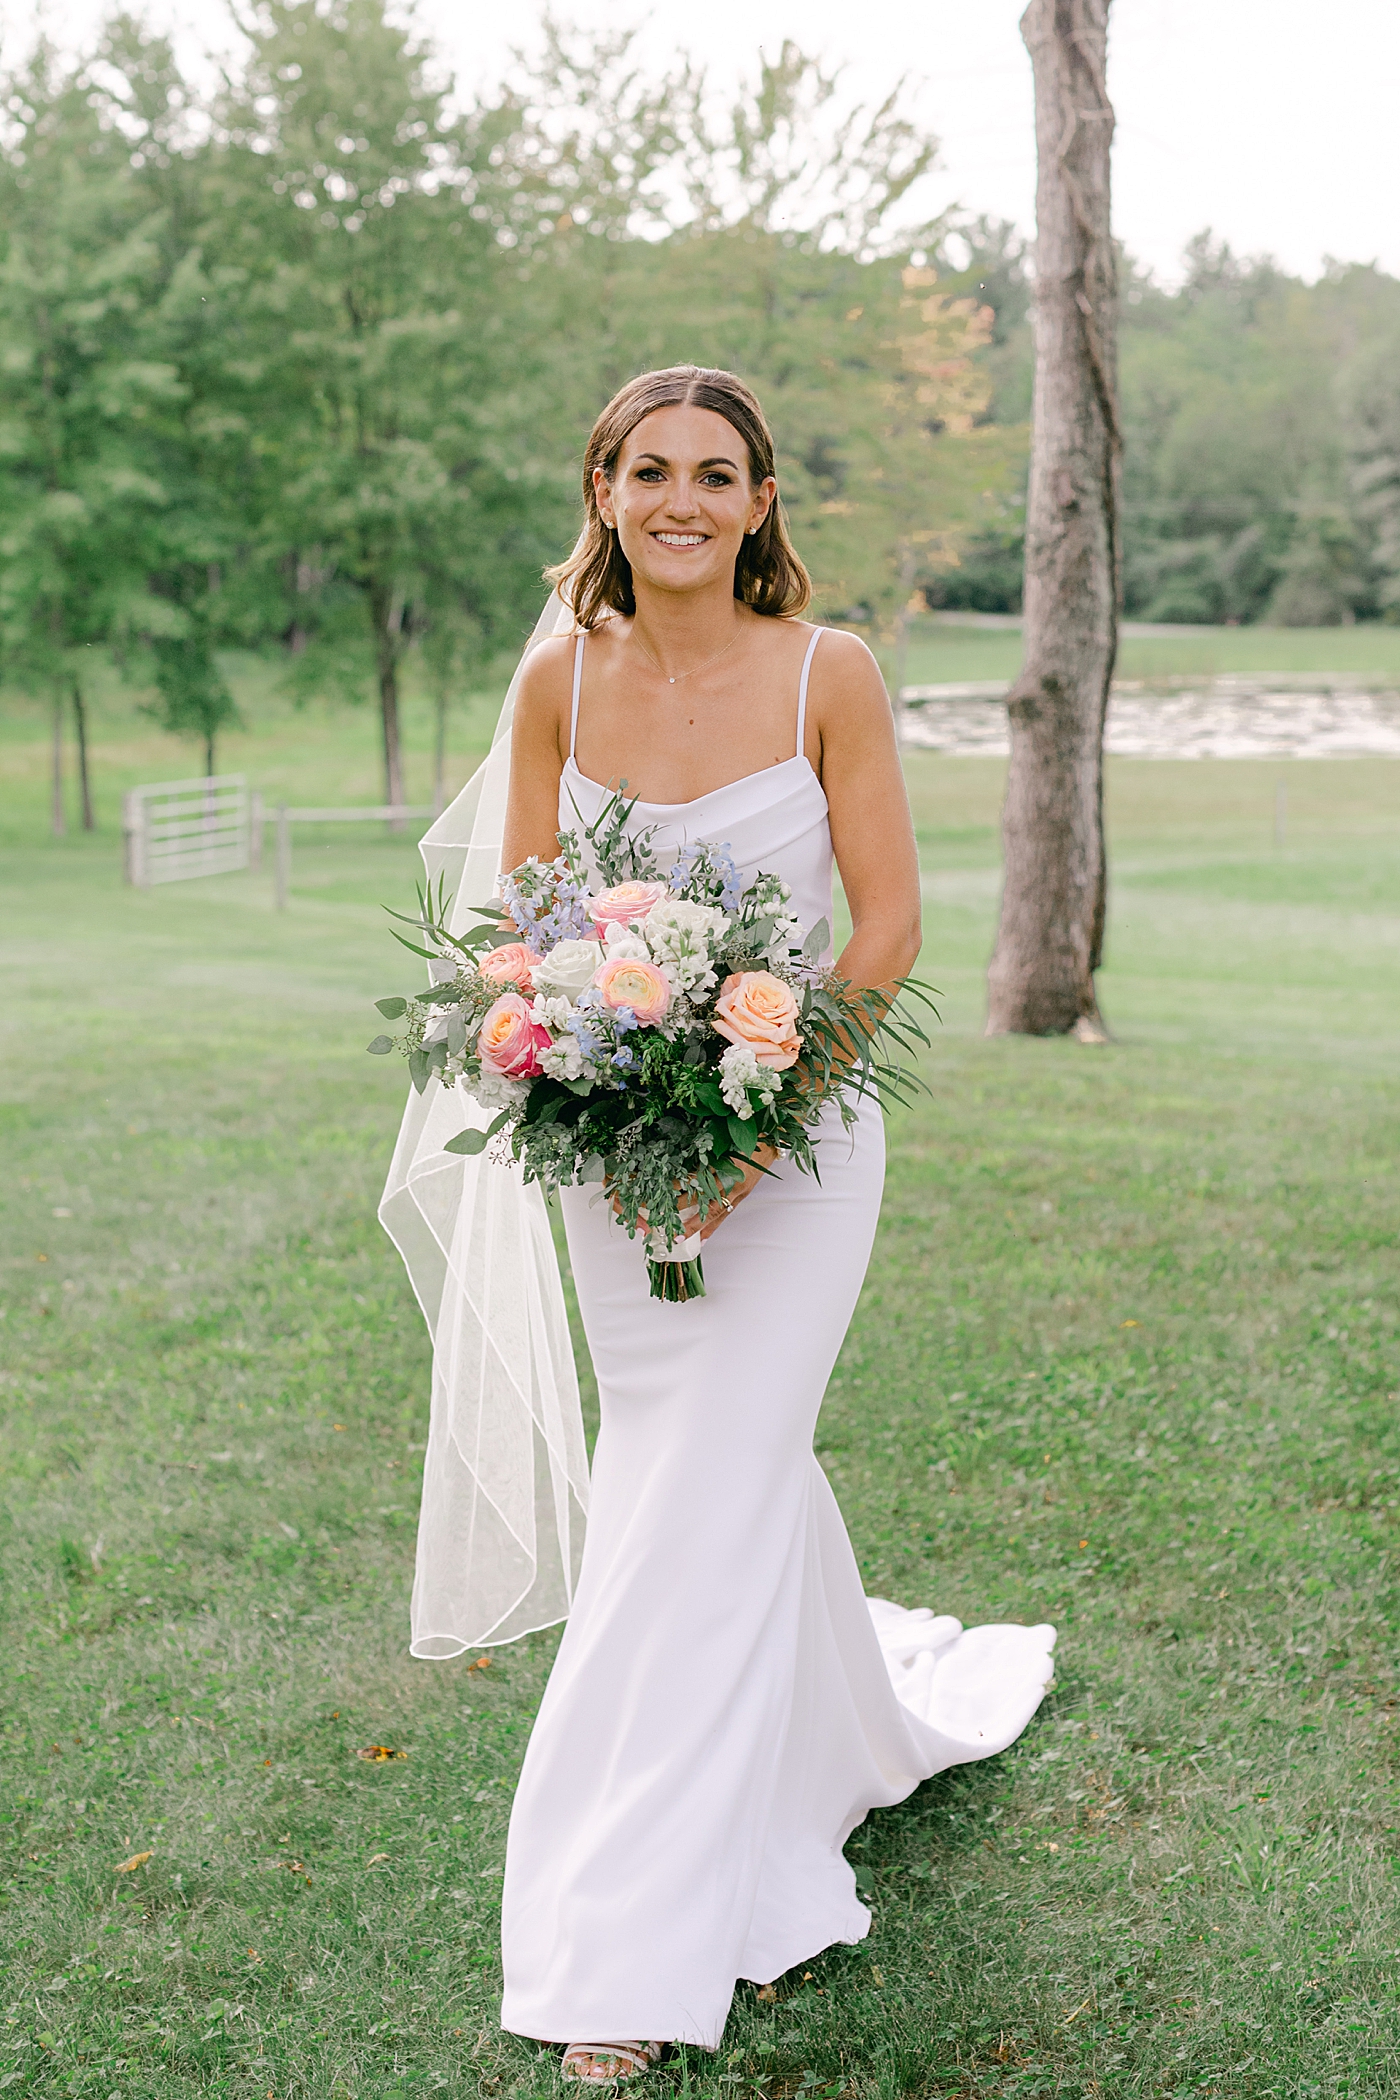 Bridal portrait with bouquet | Image by Hope Helmuth Photography